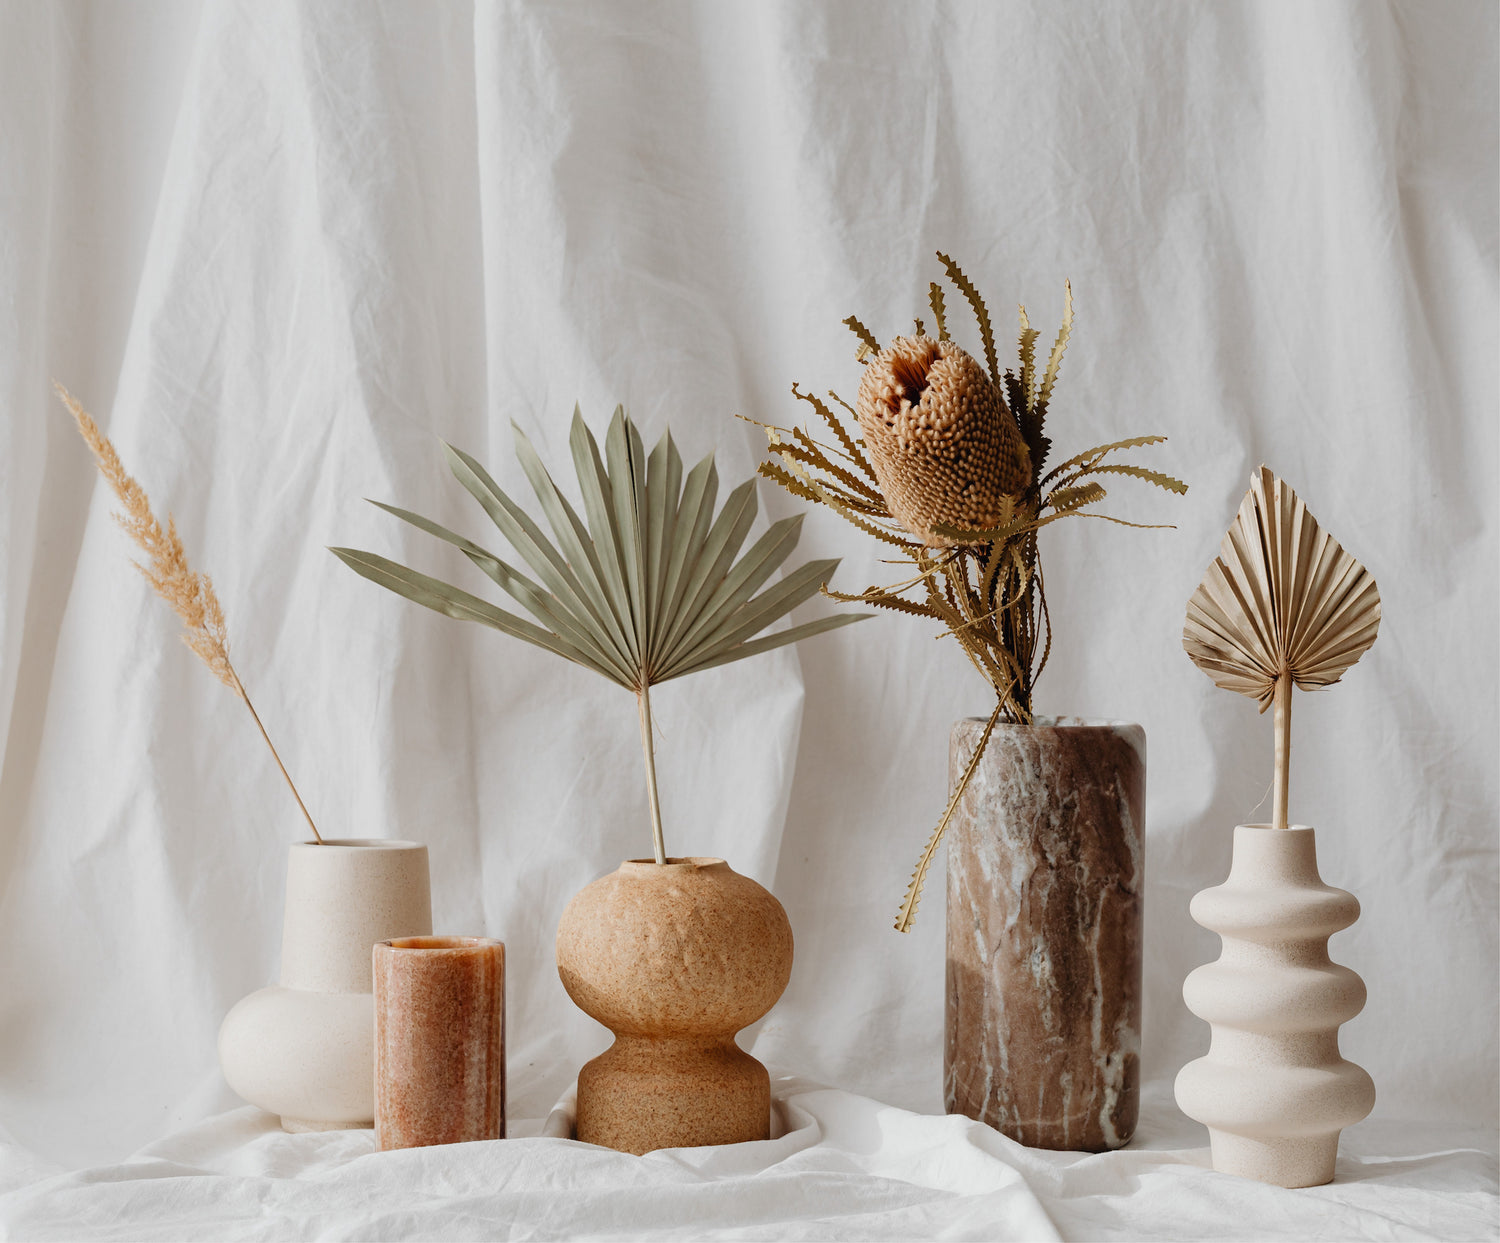 vases with dried plants